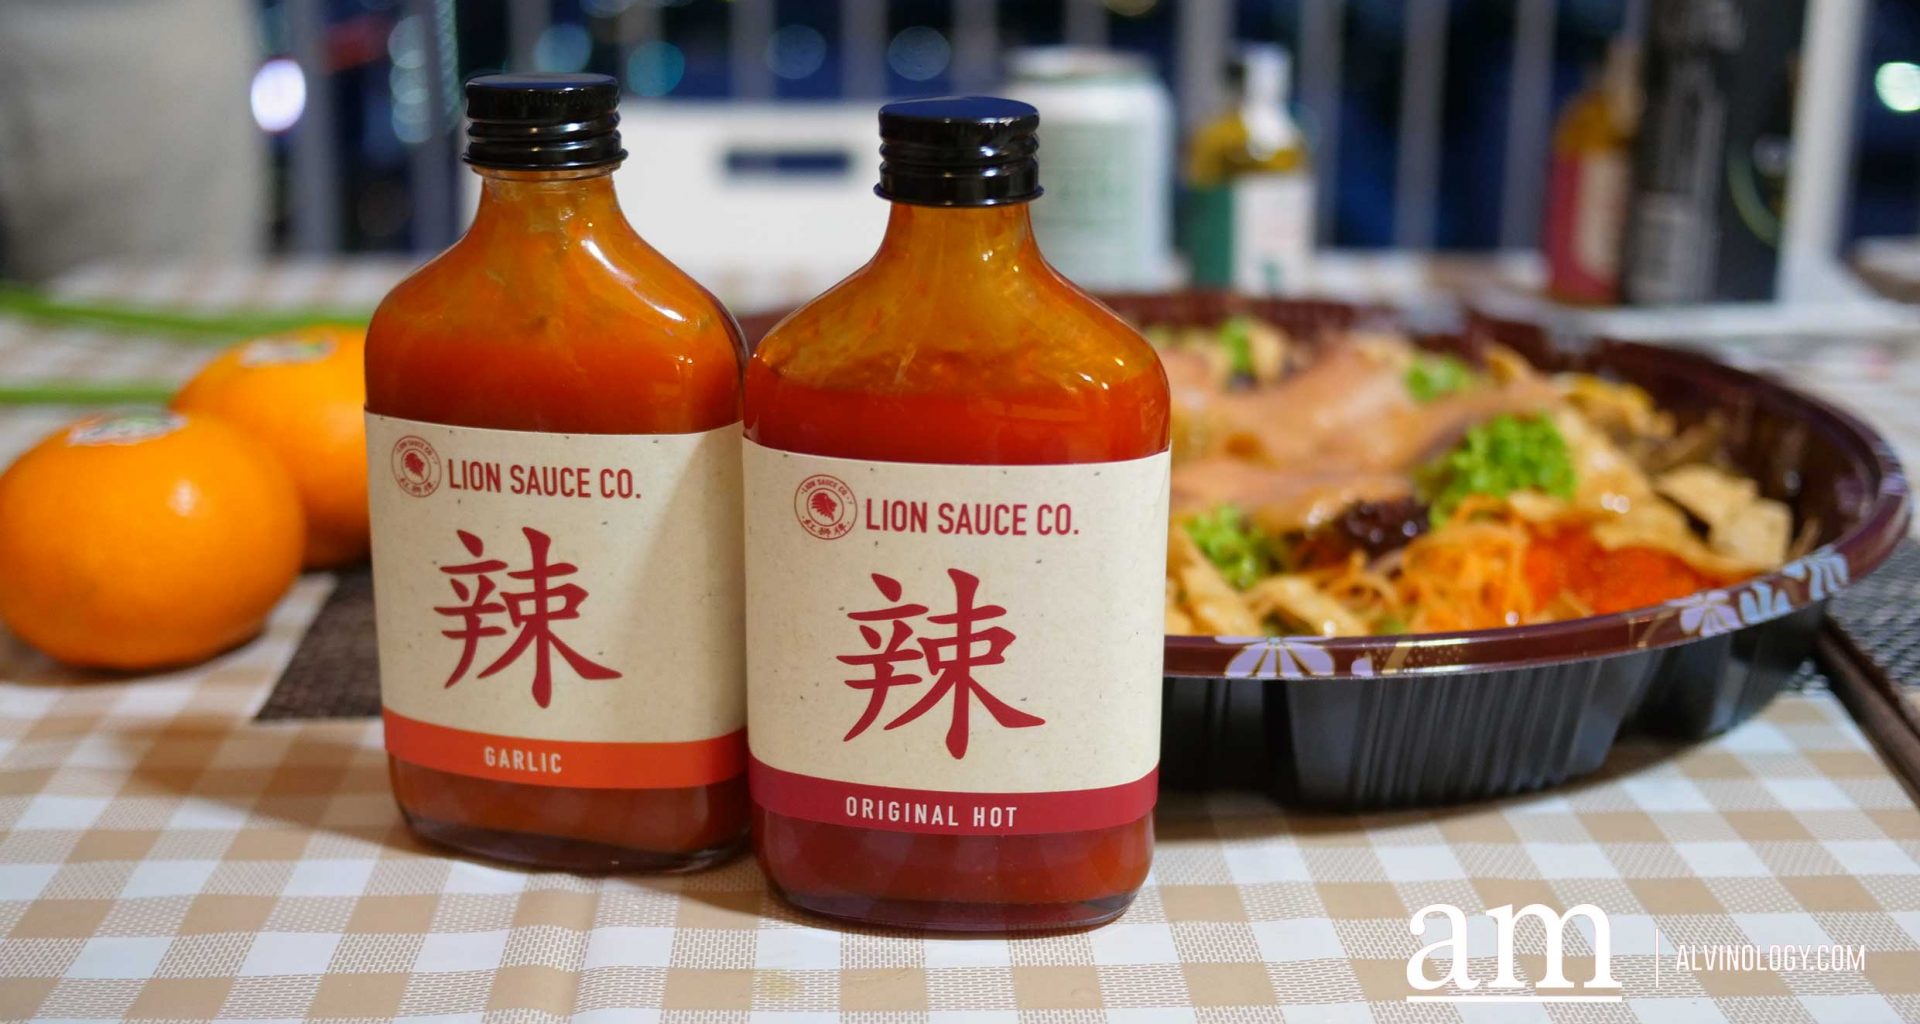 [#SupportLocal] Made in Singapore Lion Sauce Co. Original Hot Chili Sauce - Alvinology